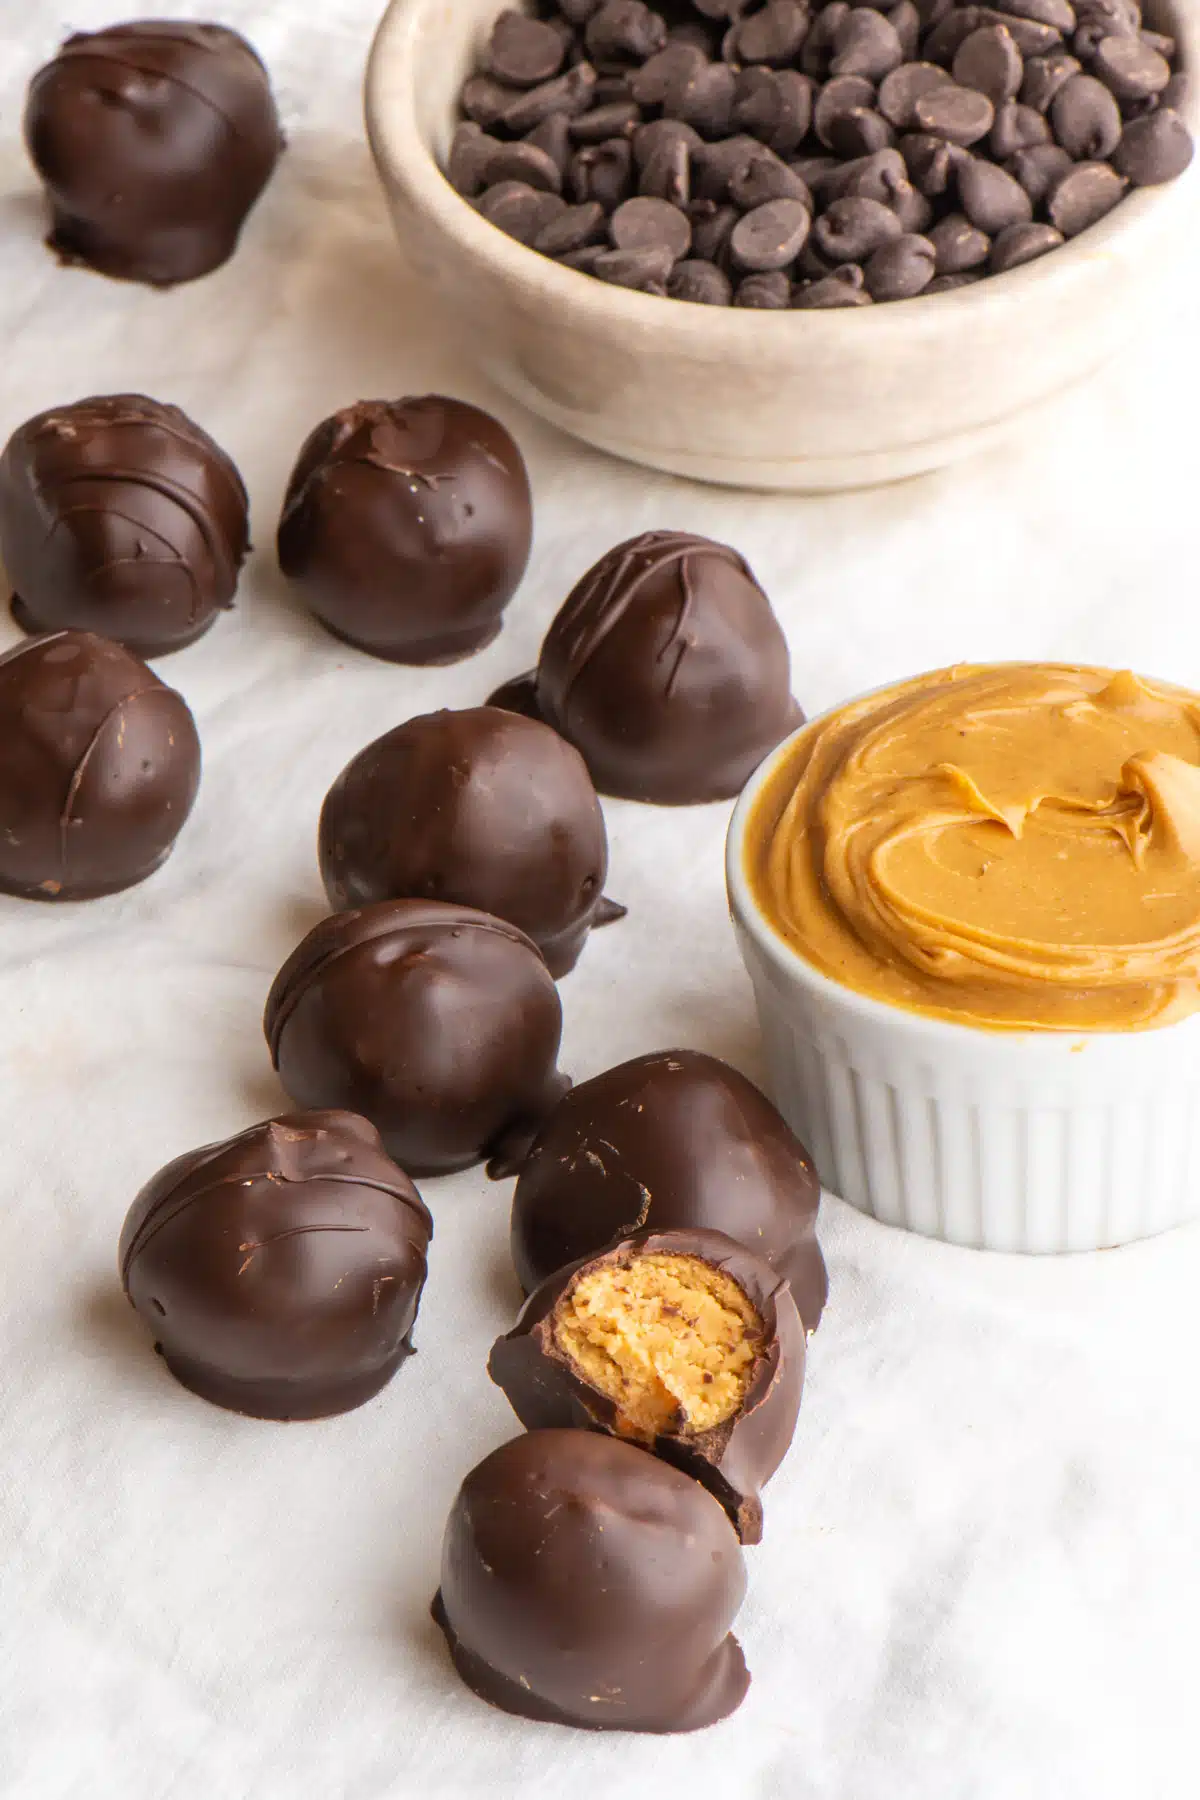 Several peanut butter balls, one with a bite taken out, sit next to a bowl of peanut butter and another bowl of chocolate chips.